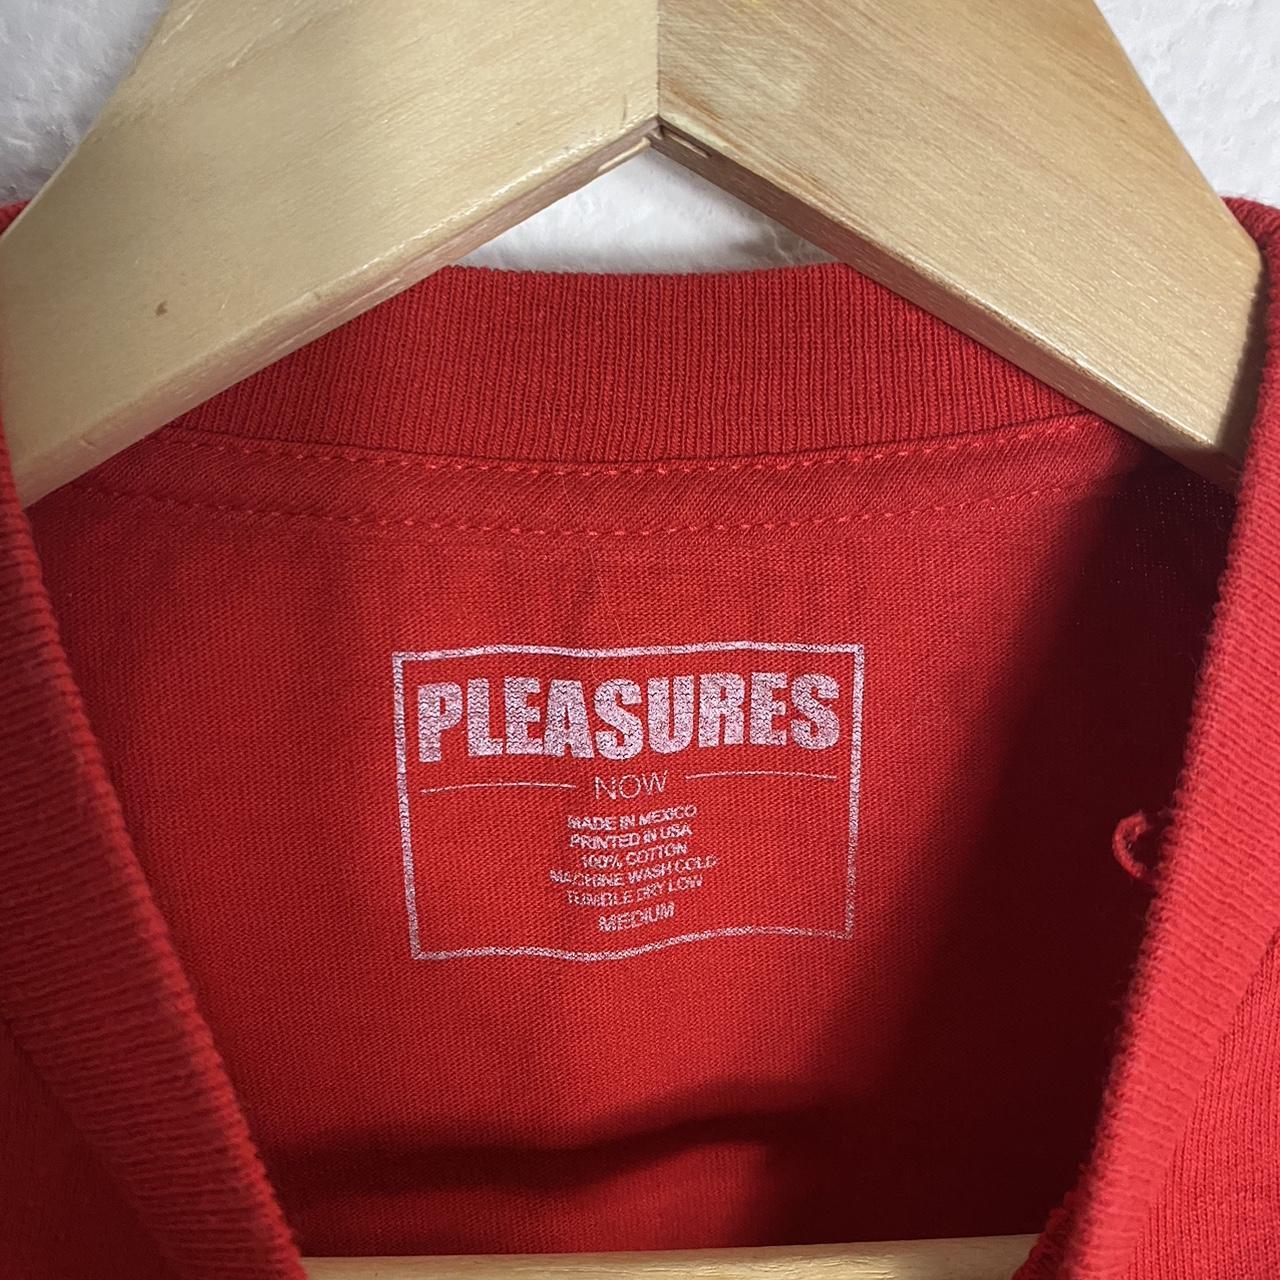 Pleasures Men's Red and Burgundy T-shirt (3)